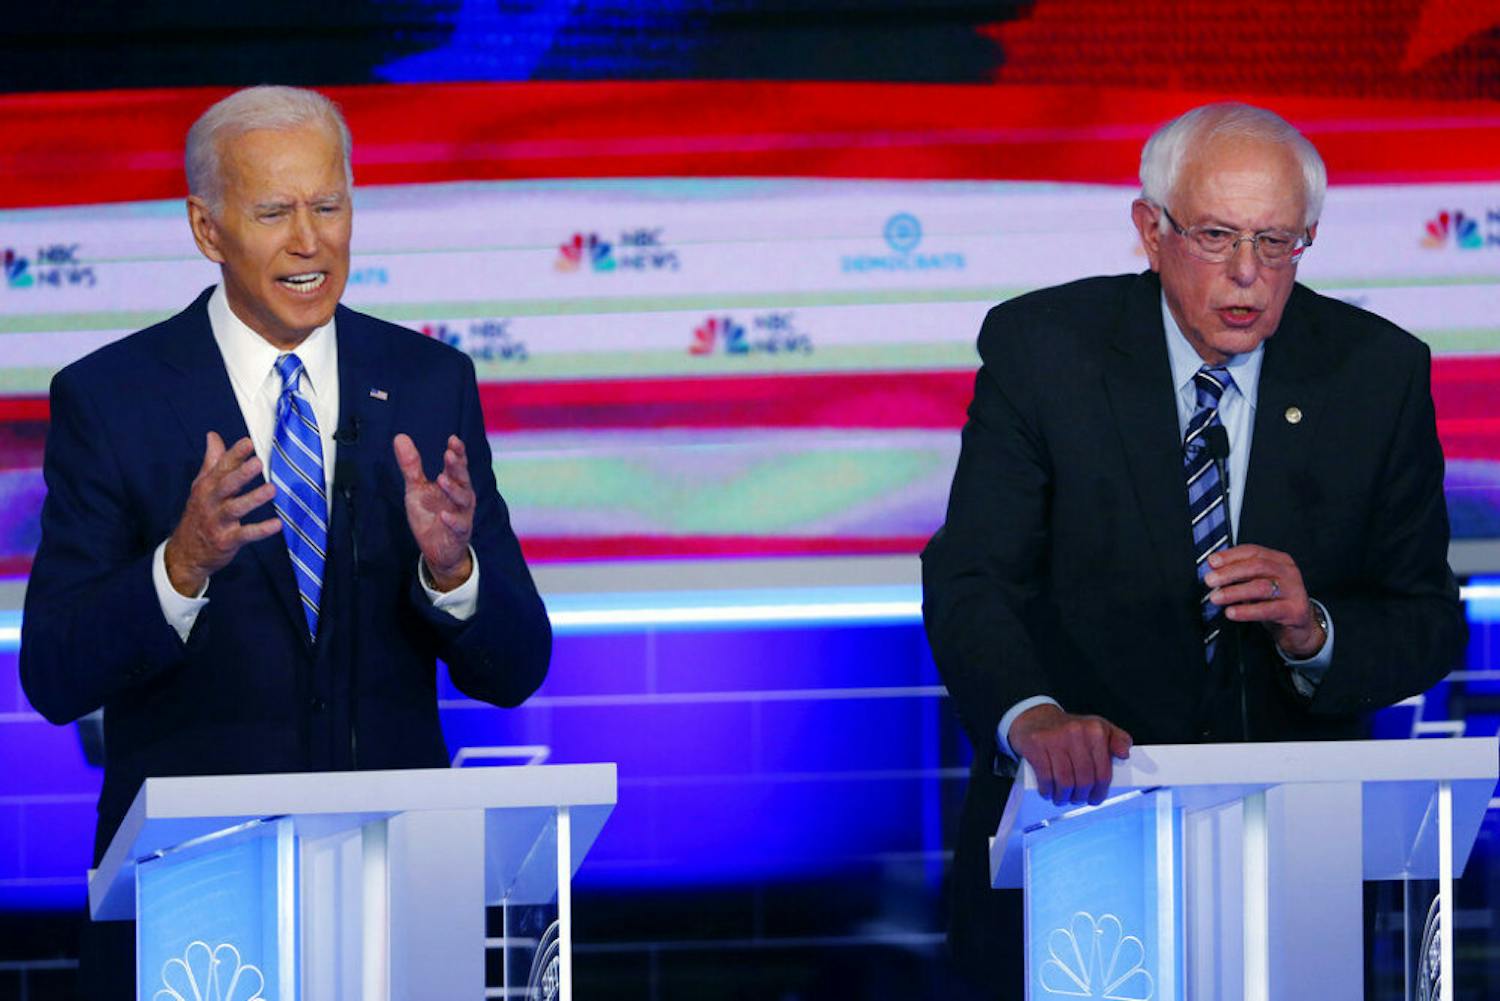 FILE - In this June 27, 2019, file photo, Democratic presidential candidates, former Vice President Joe Biden and Sen. Bernie Sanders, I-Vt., speak at the same time during the Democratic primary debate hosted by NBC News at the Adrienne Arsht Center for the Performing Arts in Miami. What might be the final showdown between the two very different Democratic candidates takes place Tuesday, March 17, 2020, during Florida's presidential primary. (AP Photo/Wilfredo Lee, File)